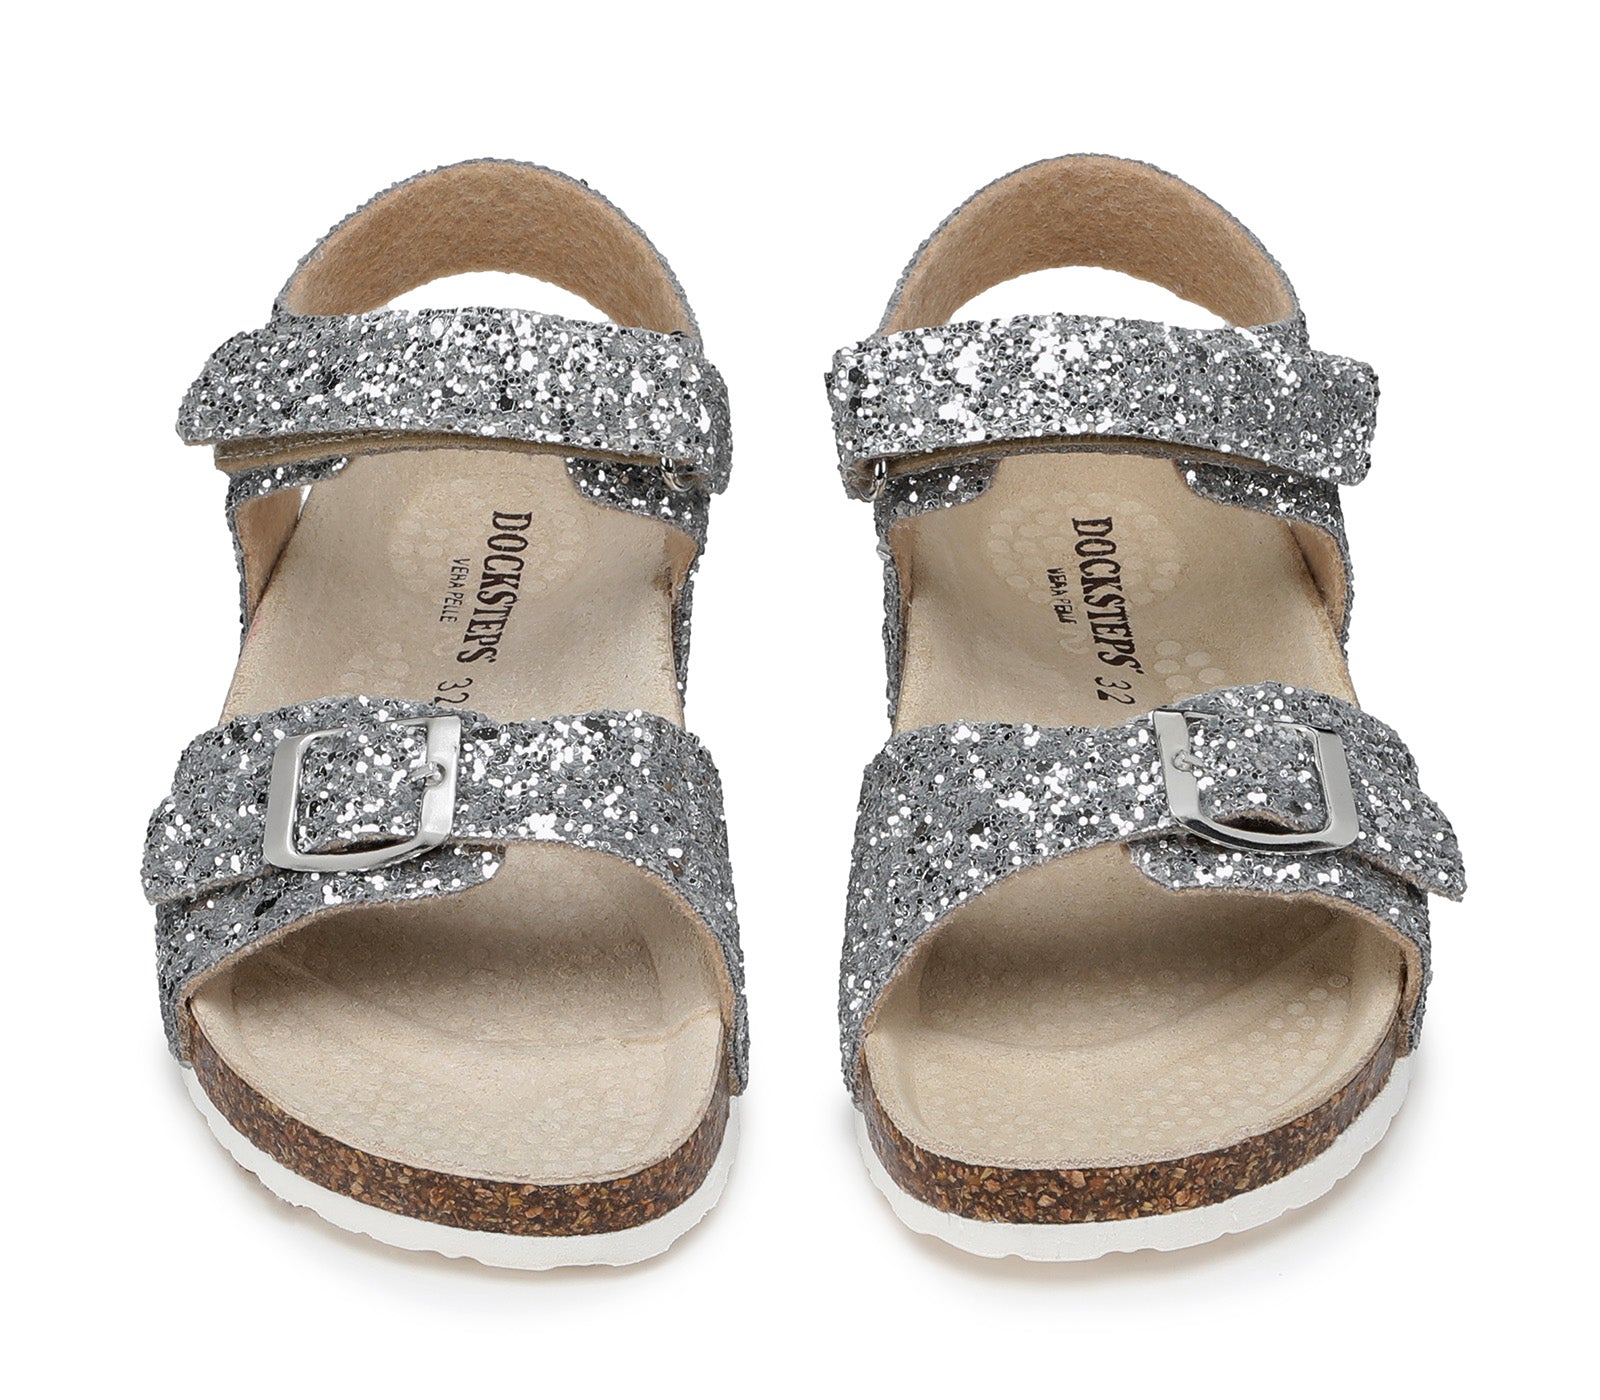 Children's Silver Glitter Sandals with Velcro Closure and Contoured Insole